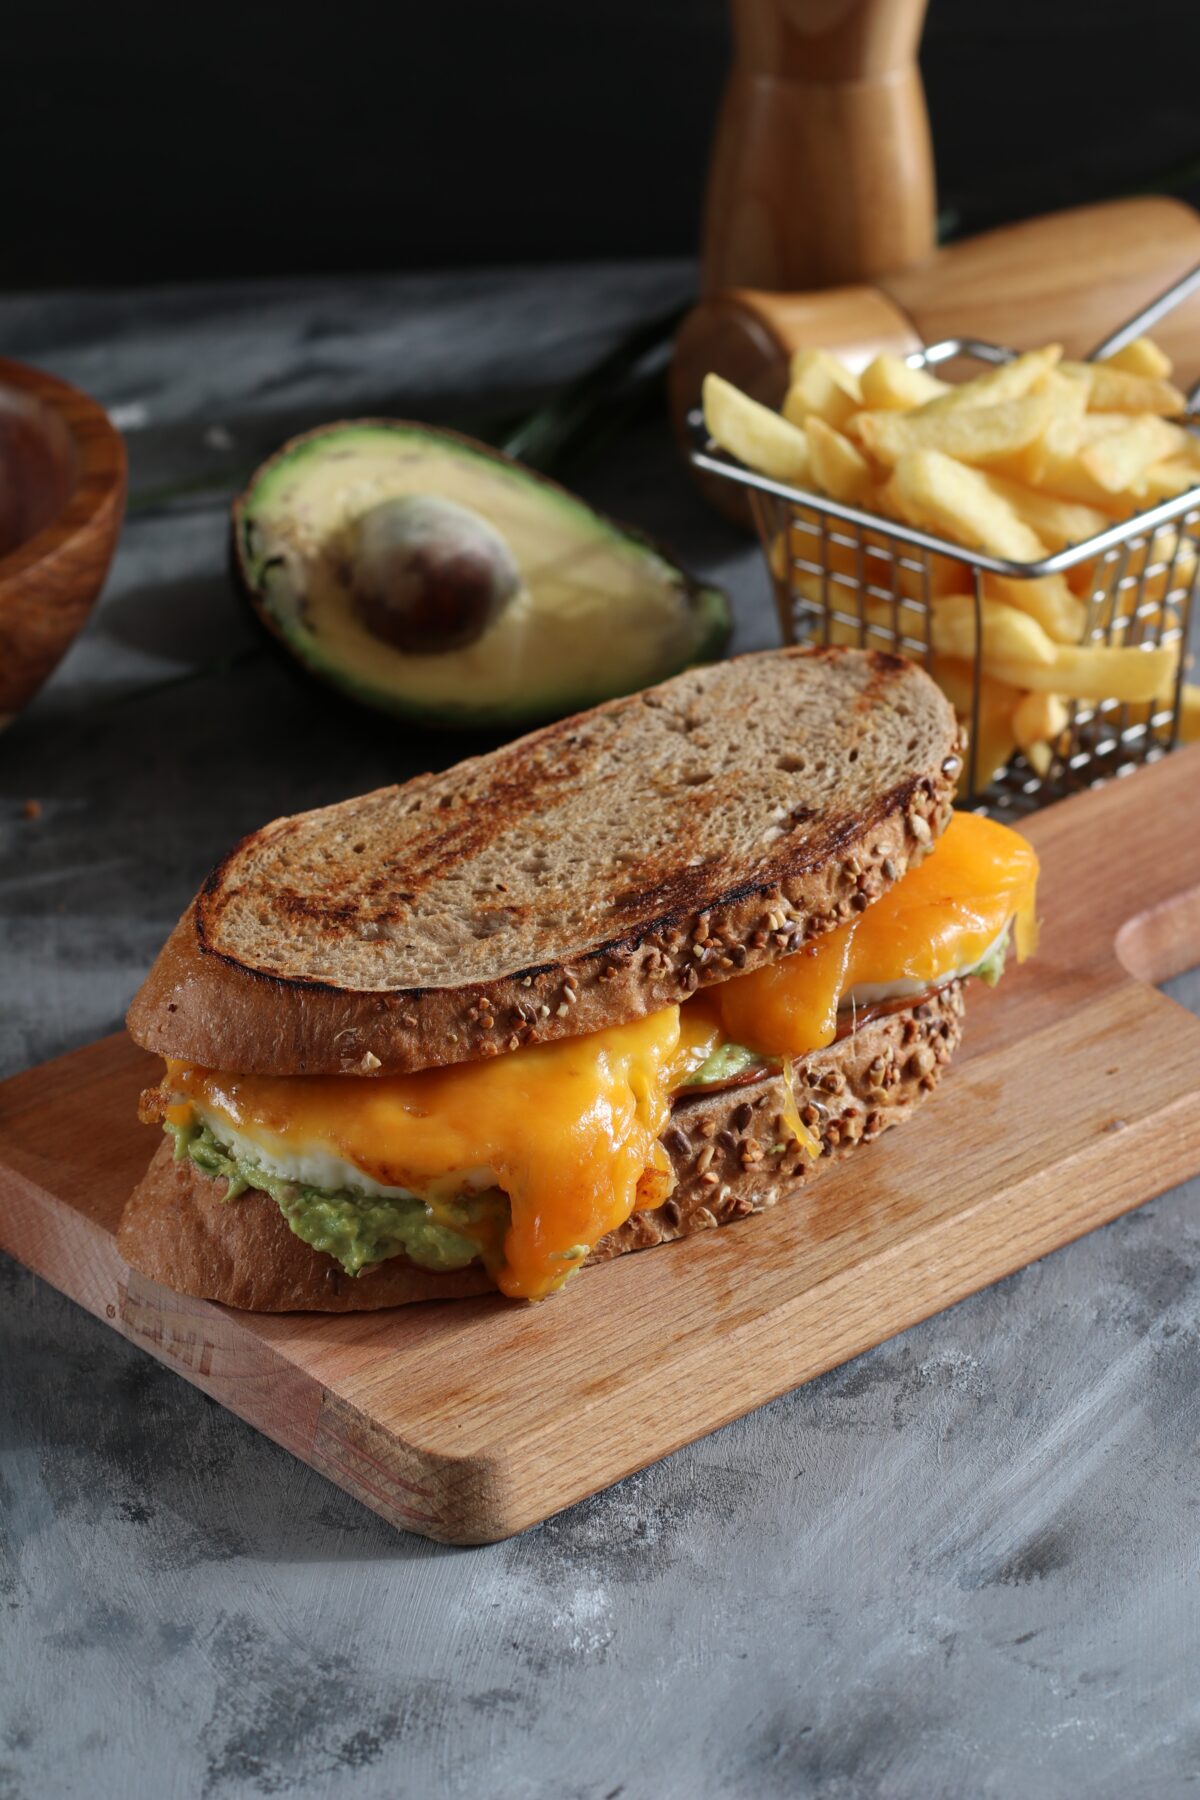 Grilled cheese sandwich on a board with avocado and fries in the background.